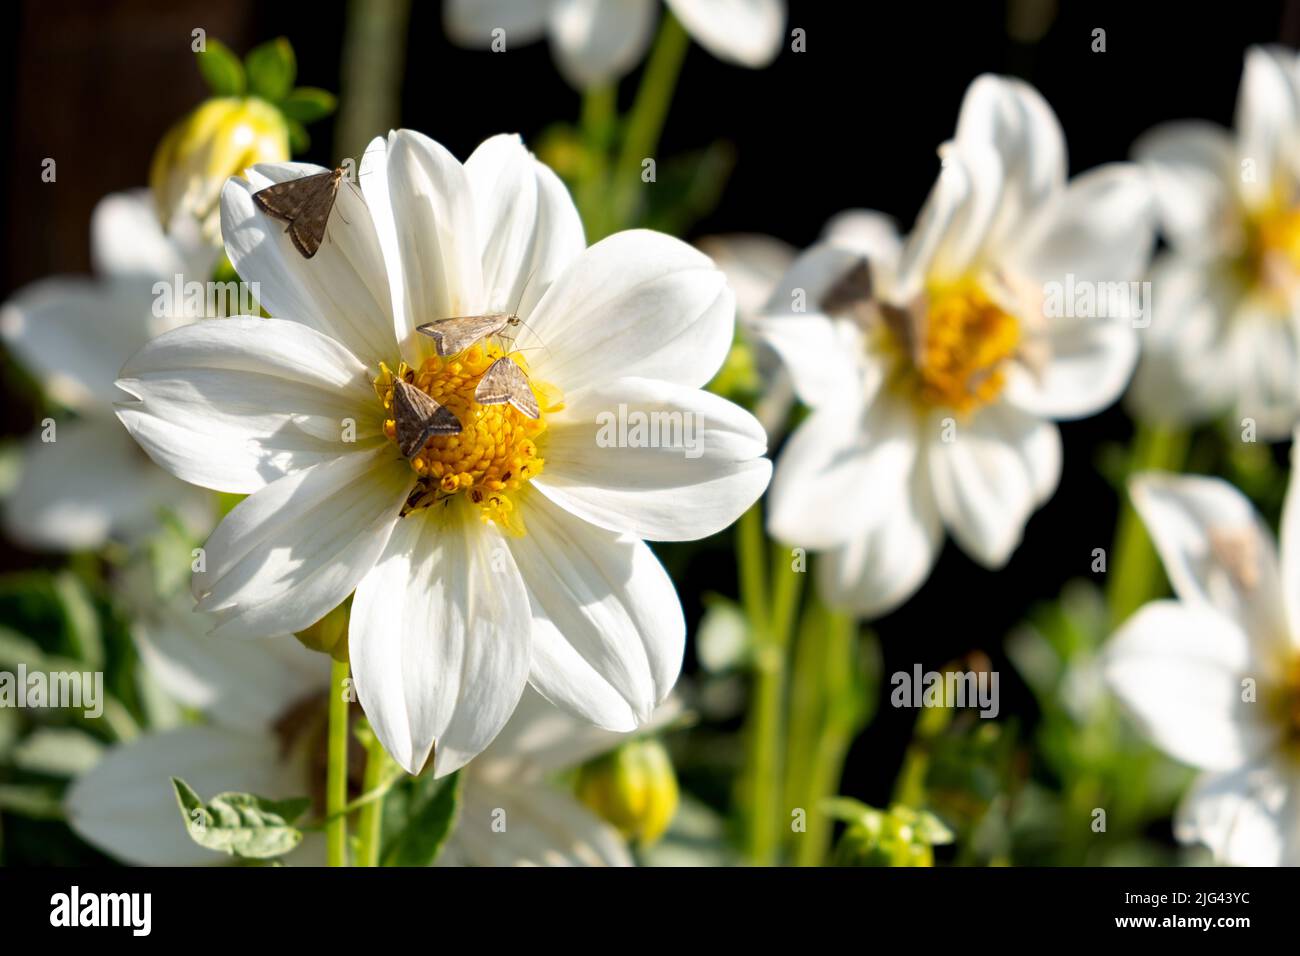 Dangerous flying insects on a flower of ornamental onions Stock Photo